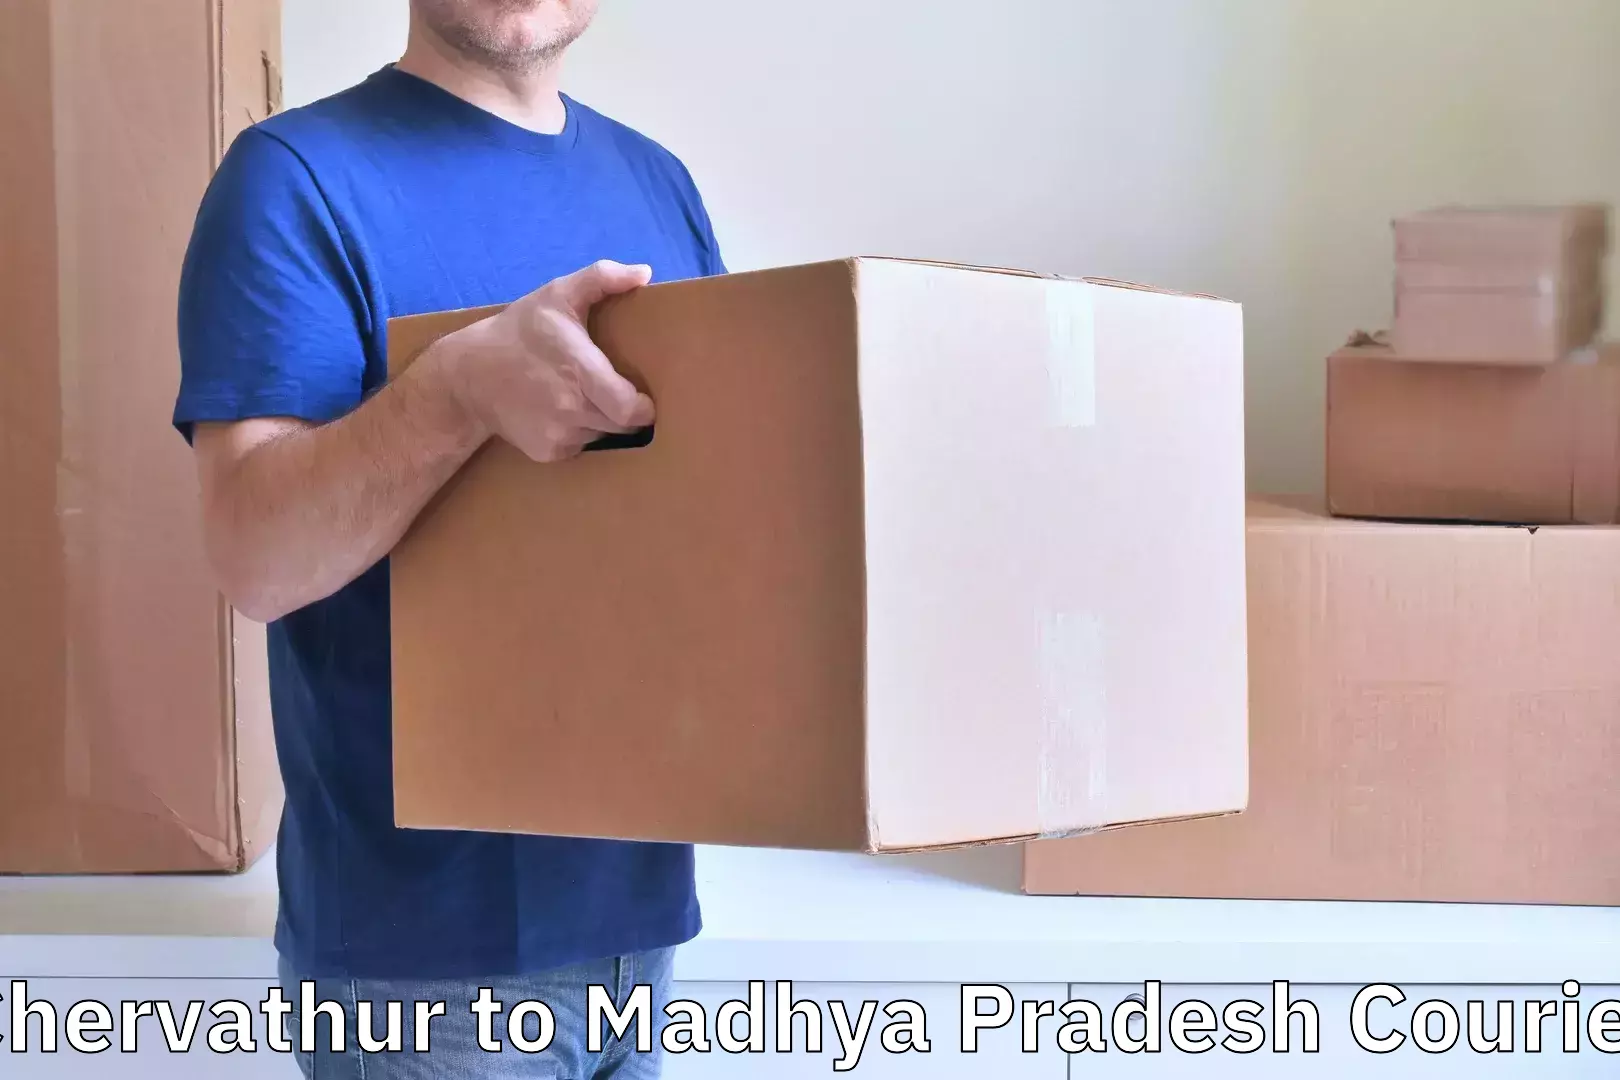 Heavy luggage shipping in Chervathur to Gotegaon